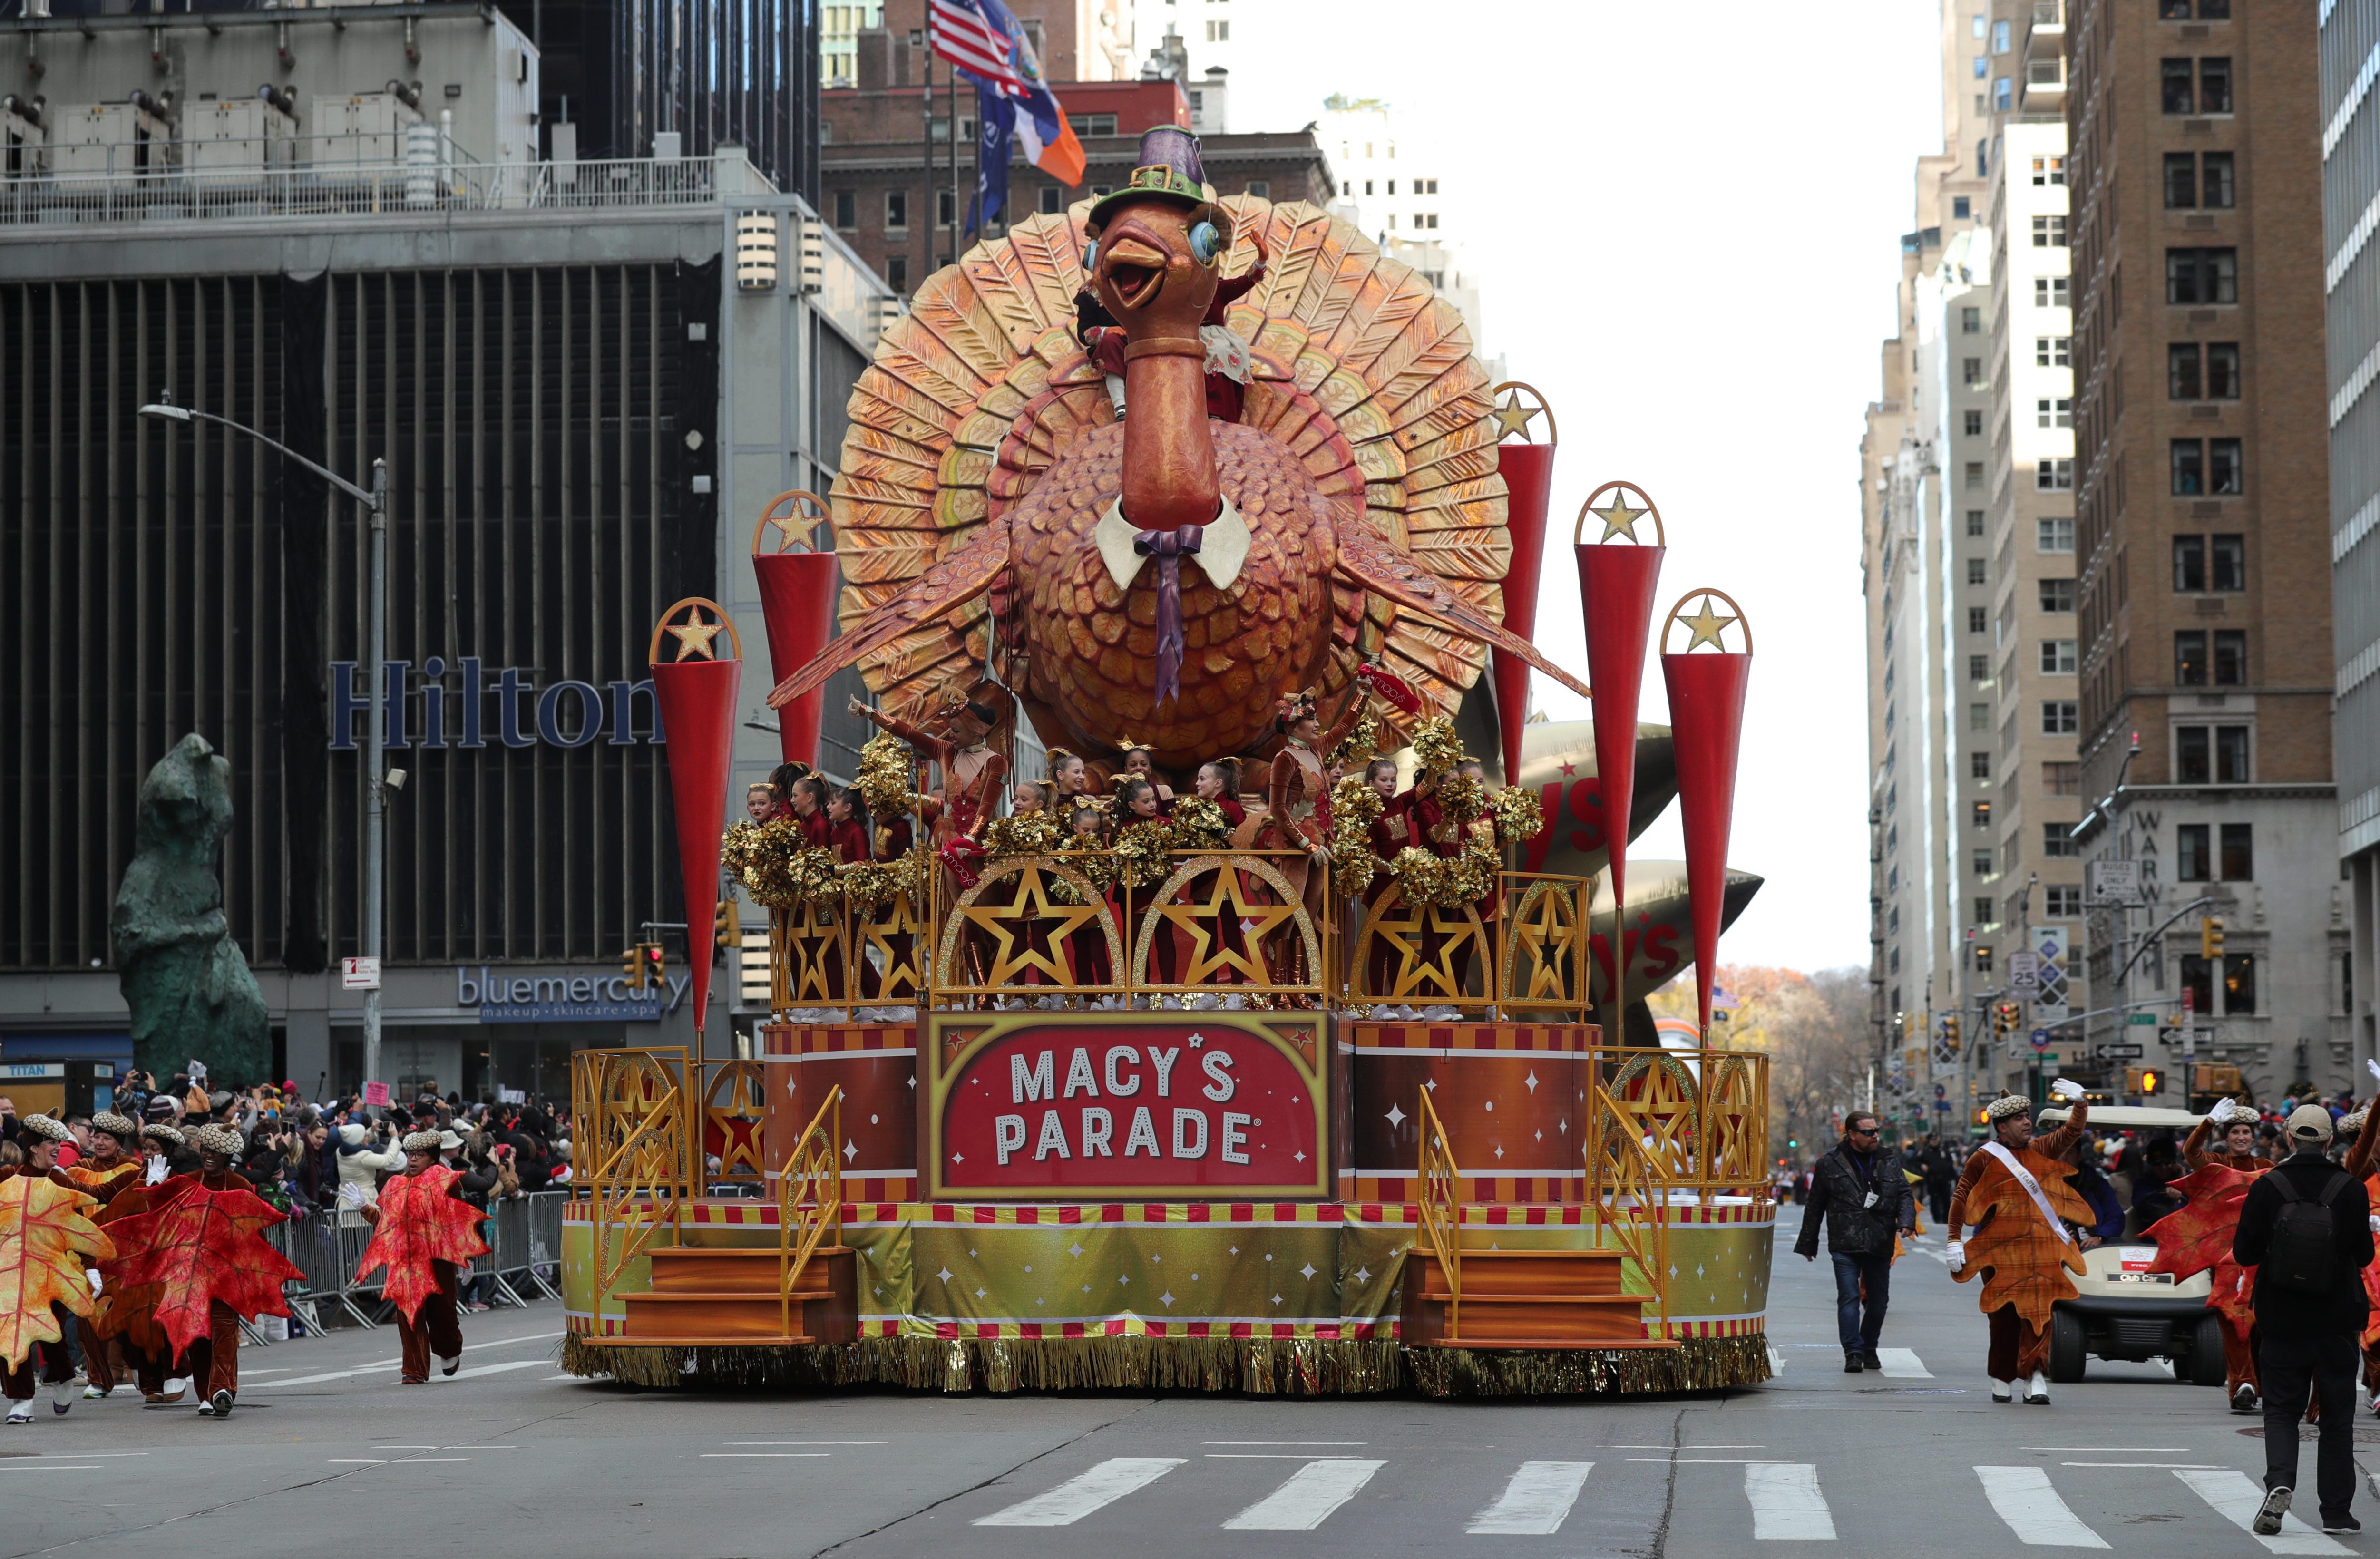 How to Watch the 95th Macy’s Thanksgiving Parade Without Cable